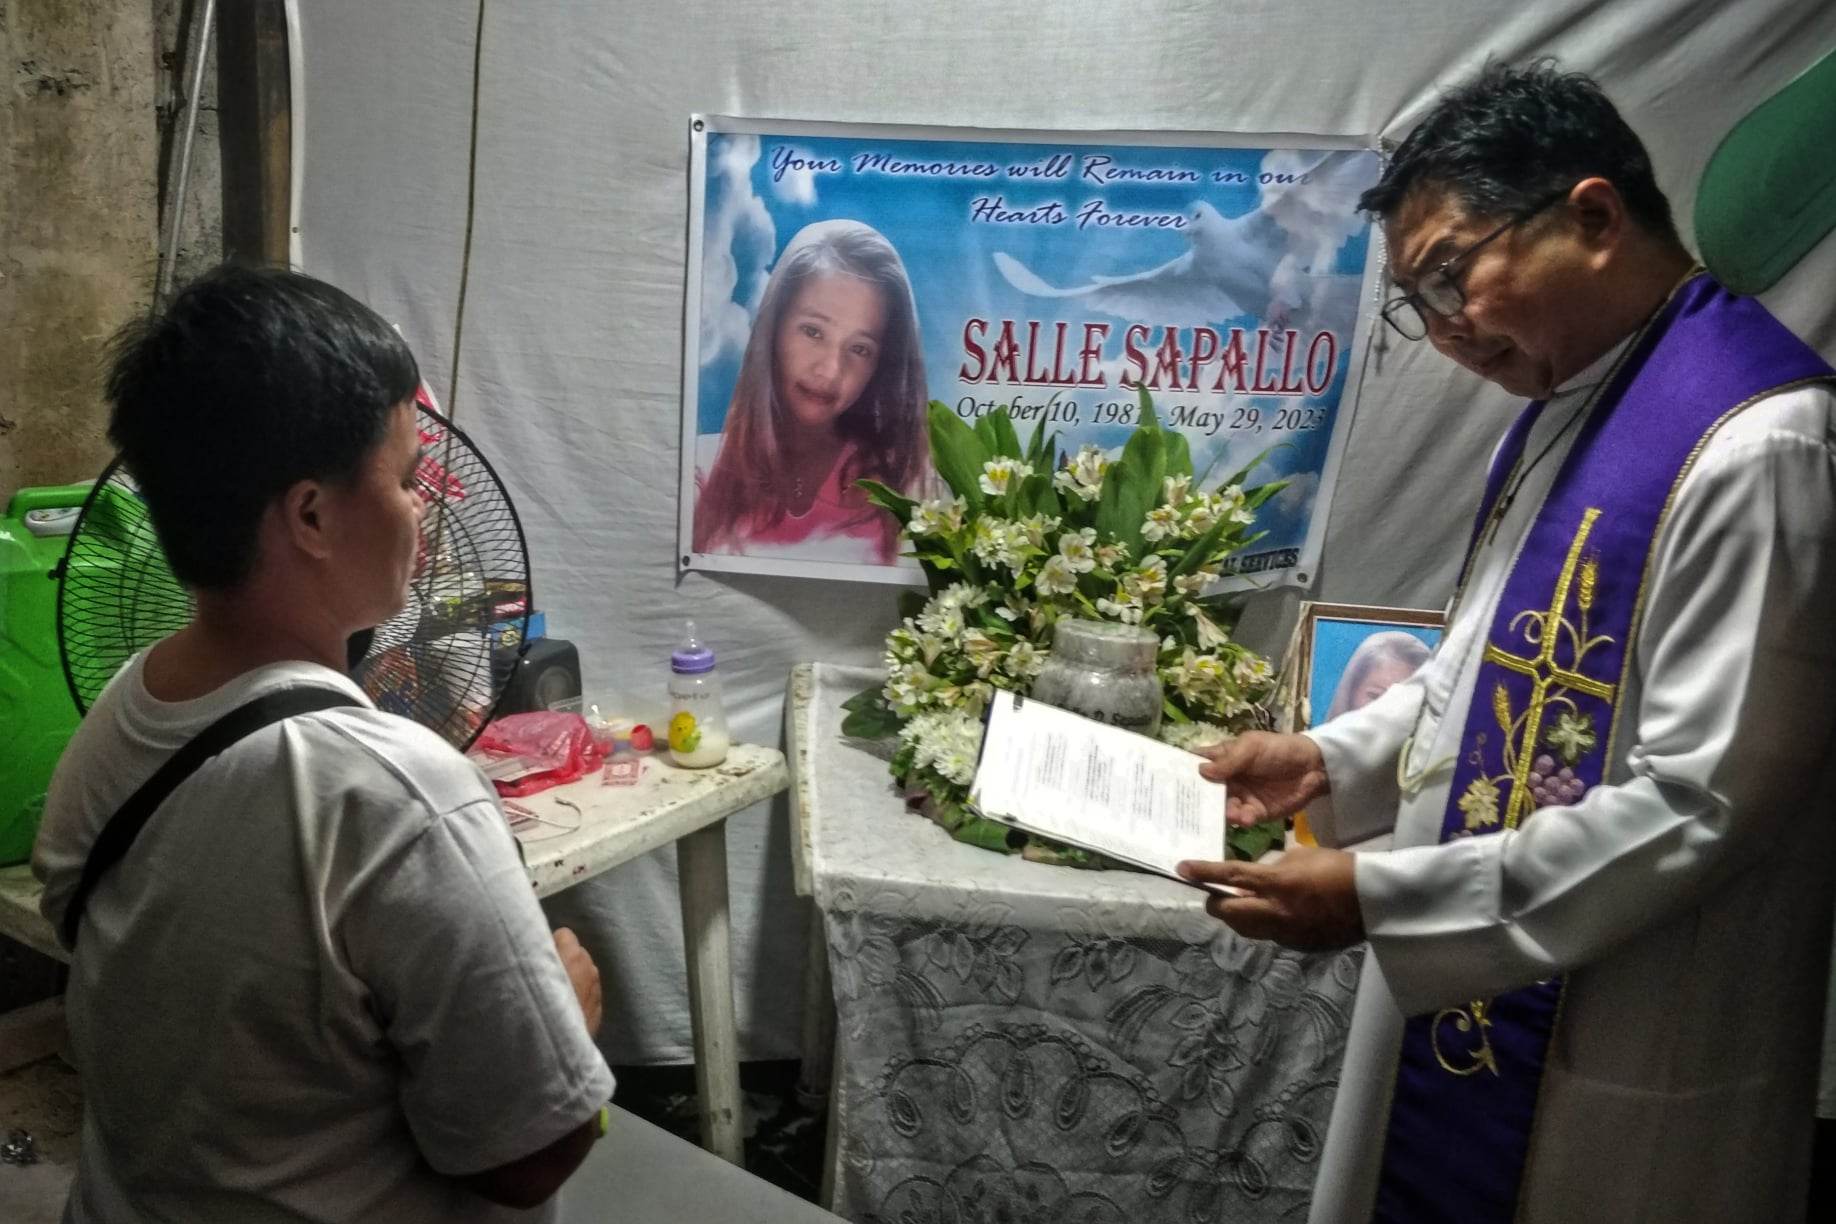 Fr. Flavie Villanueva, head of Program Paghilum, which takes care of families of victims of  the drug war, condoles with the family of Salle Sapallo, who was killed in a police drug operation in Navotas on May 29. Photo by Vincent Go.